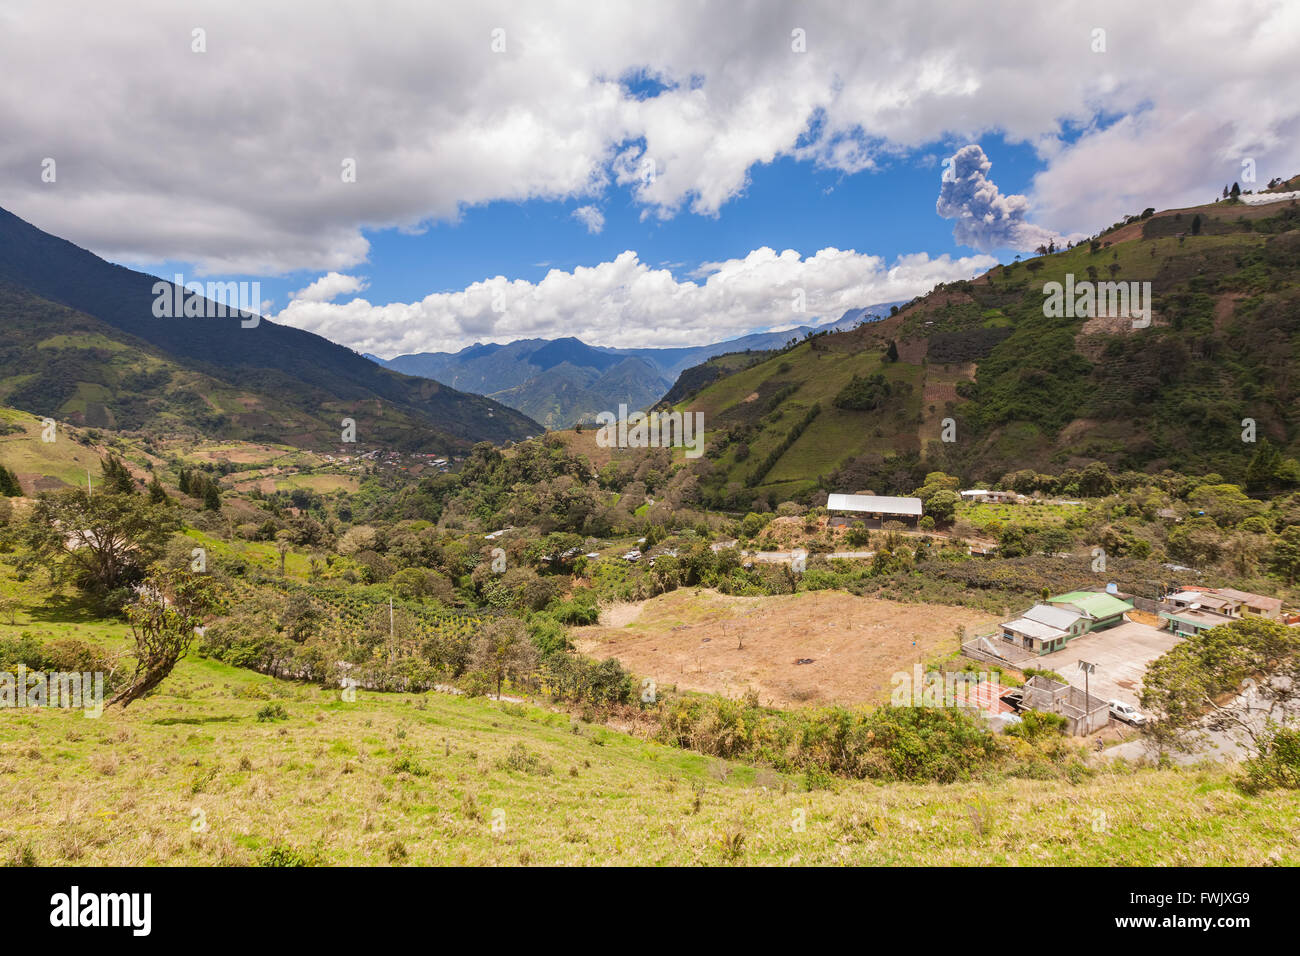 Tungurahua, One Of Ecuador Most Active Volcanoes, Is Made Up Of Three Volcanic Edifices, South America Stock Photo